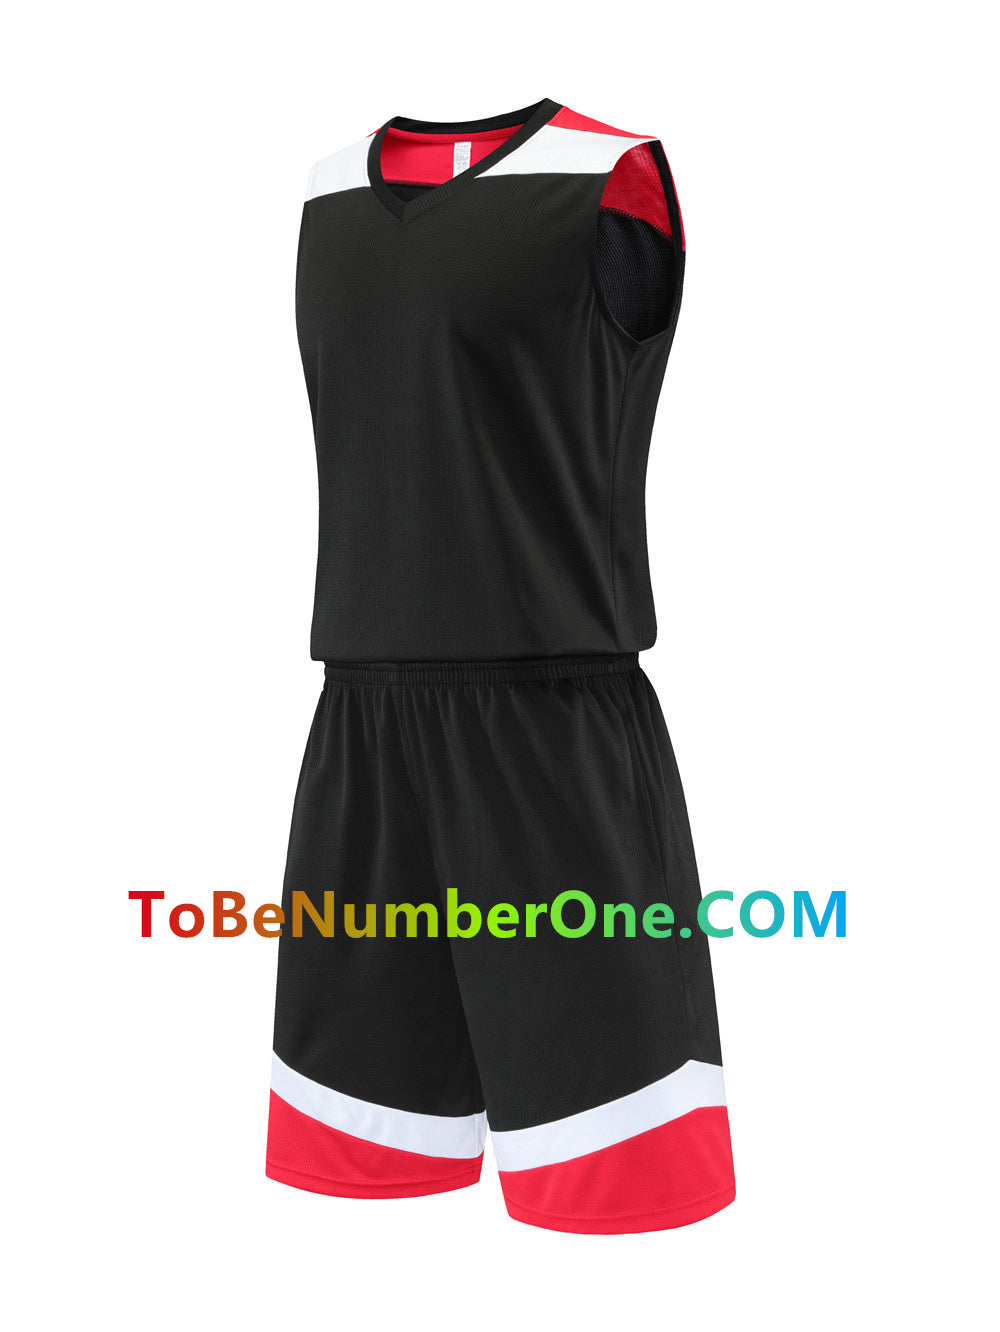 Customize instock High Quality Quick-drying basketball jerseys&shorts with pocket 226# print with team name , player and number.